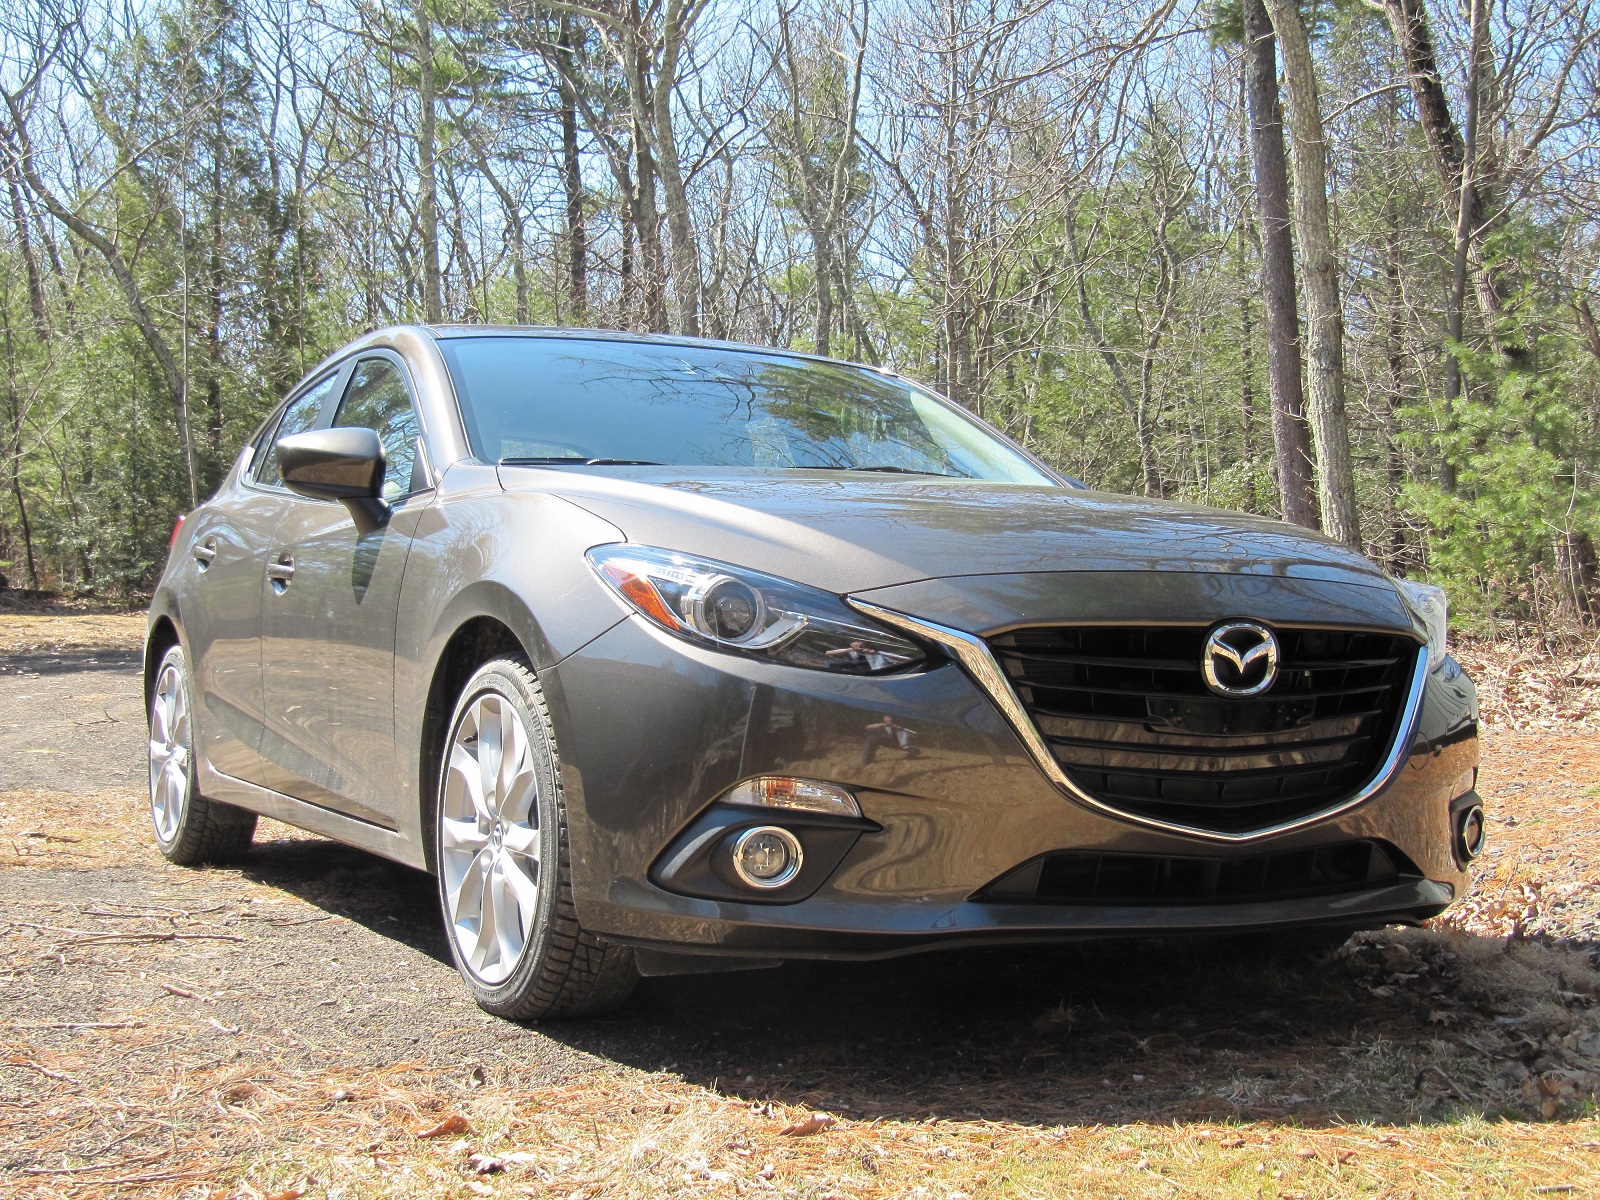 2014 Mazda 3: Gas Mileage Review Of Sporty Compact Hatchback